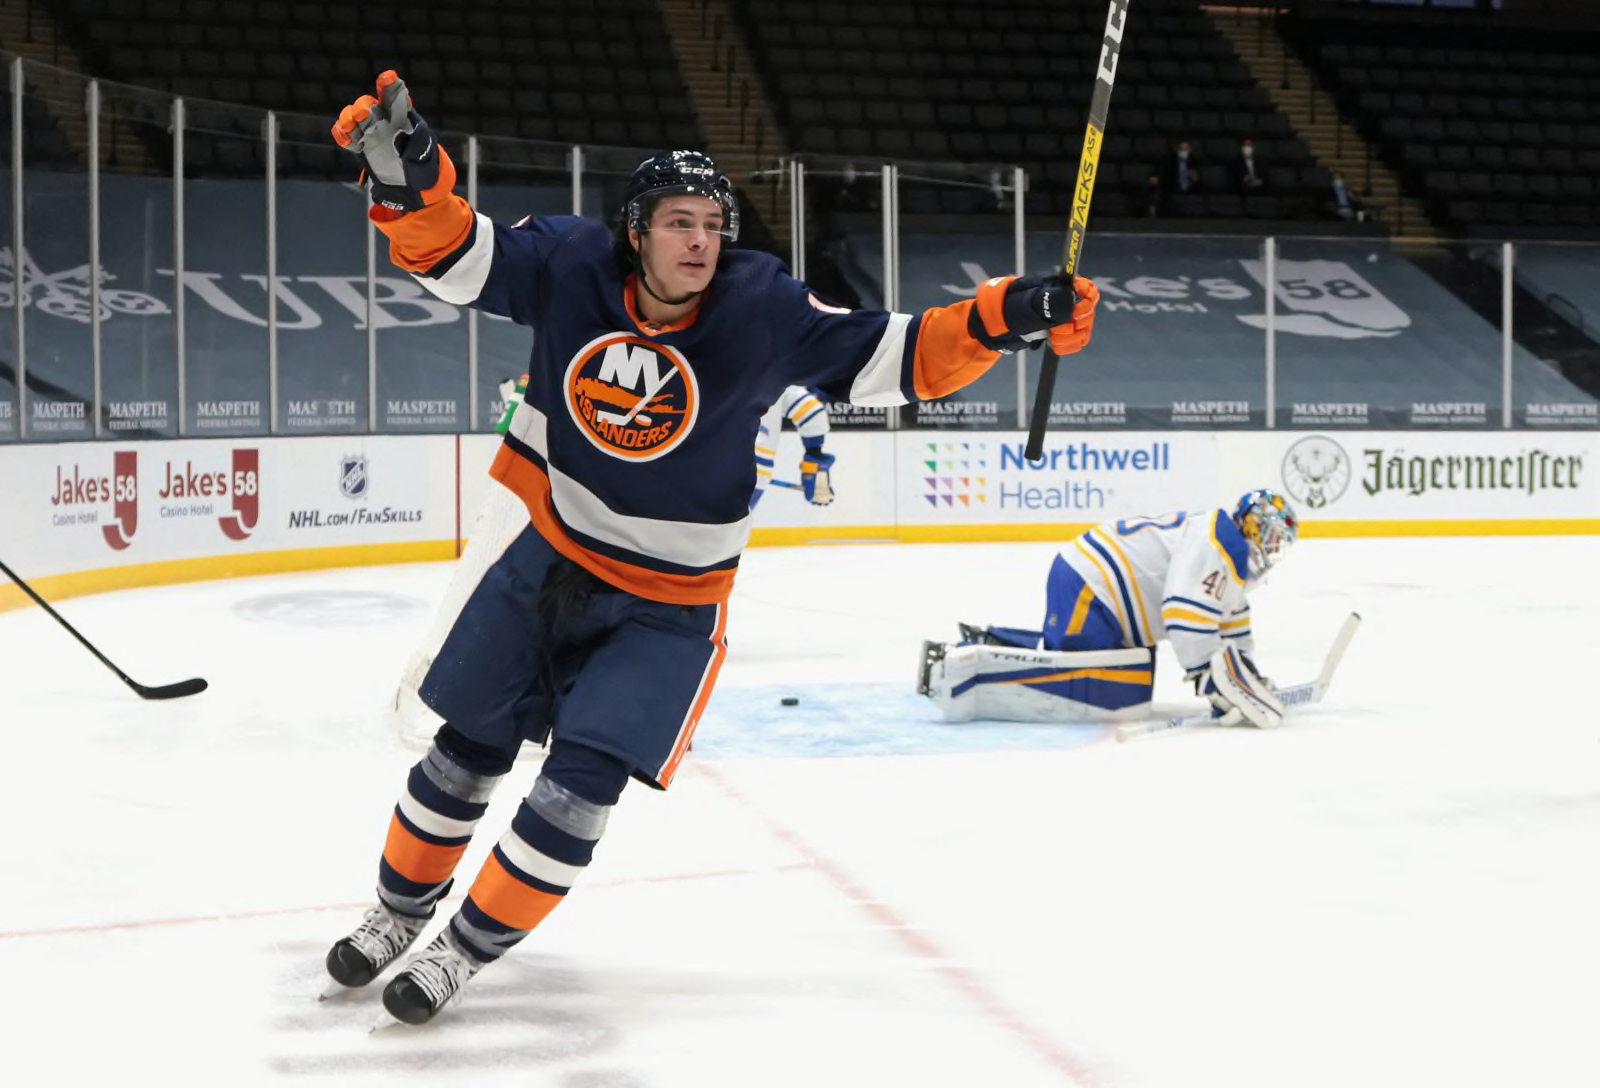 Islanders Star Mat Barzal Has Shown Growth In His Game - NY Sports Day